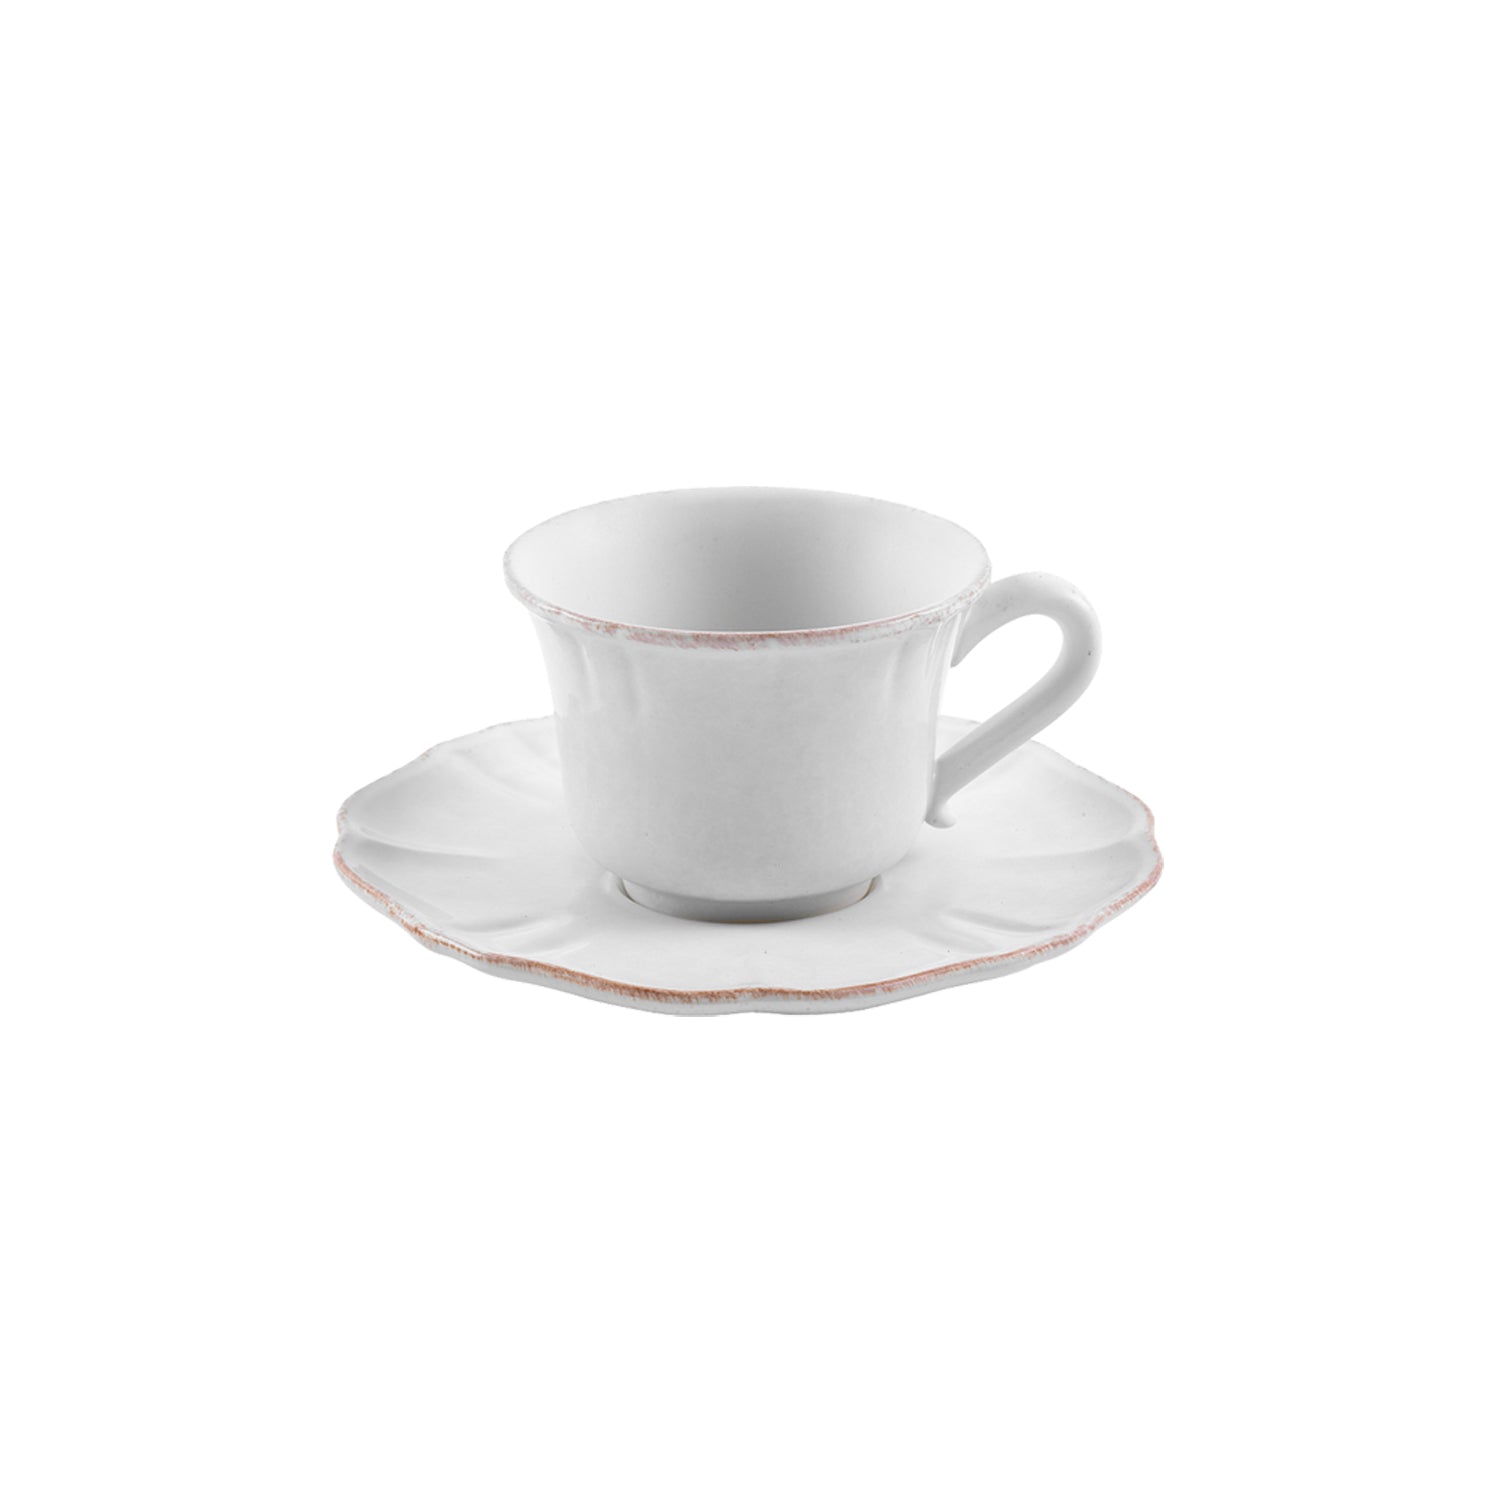 Impressions Tea Cup and Saucer 8 oz. White